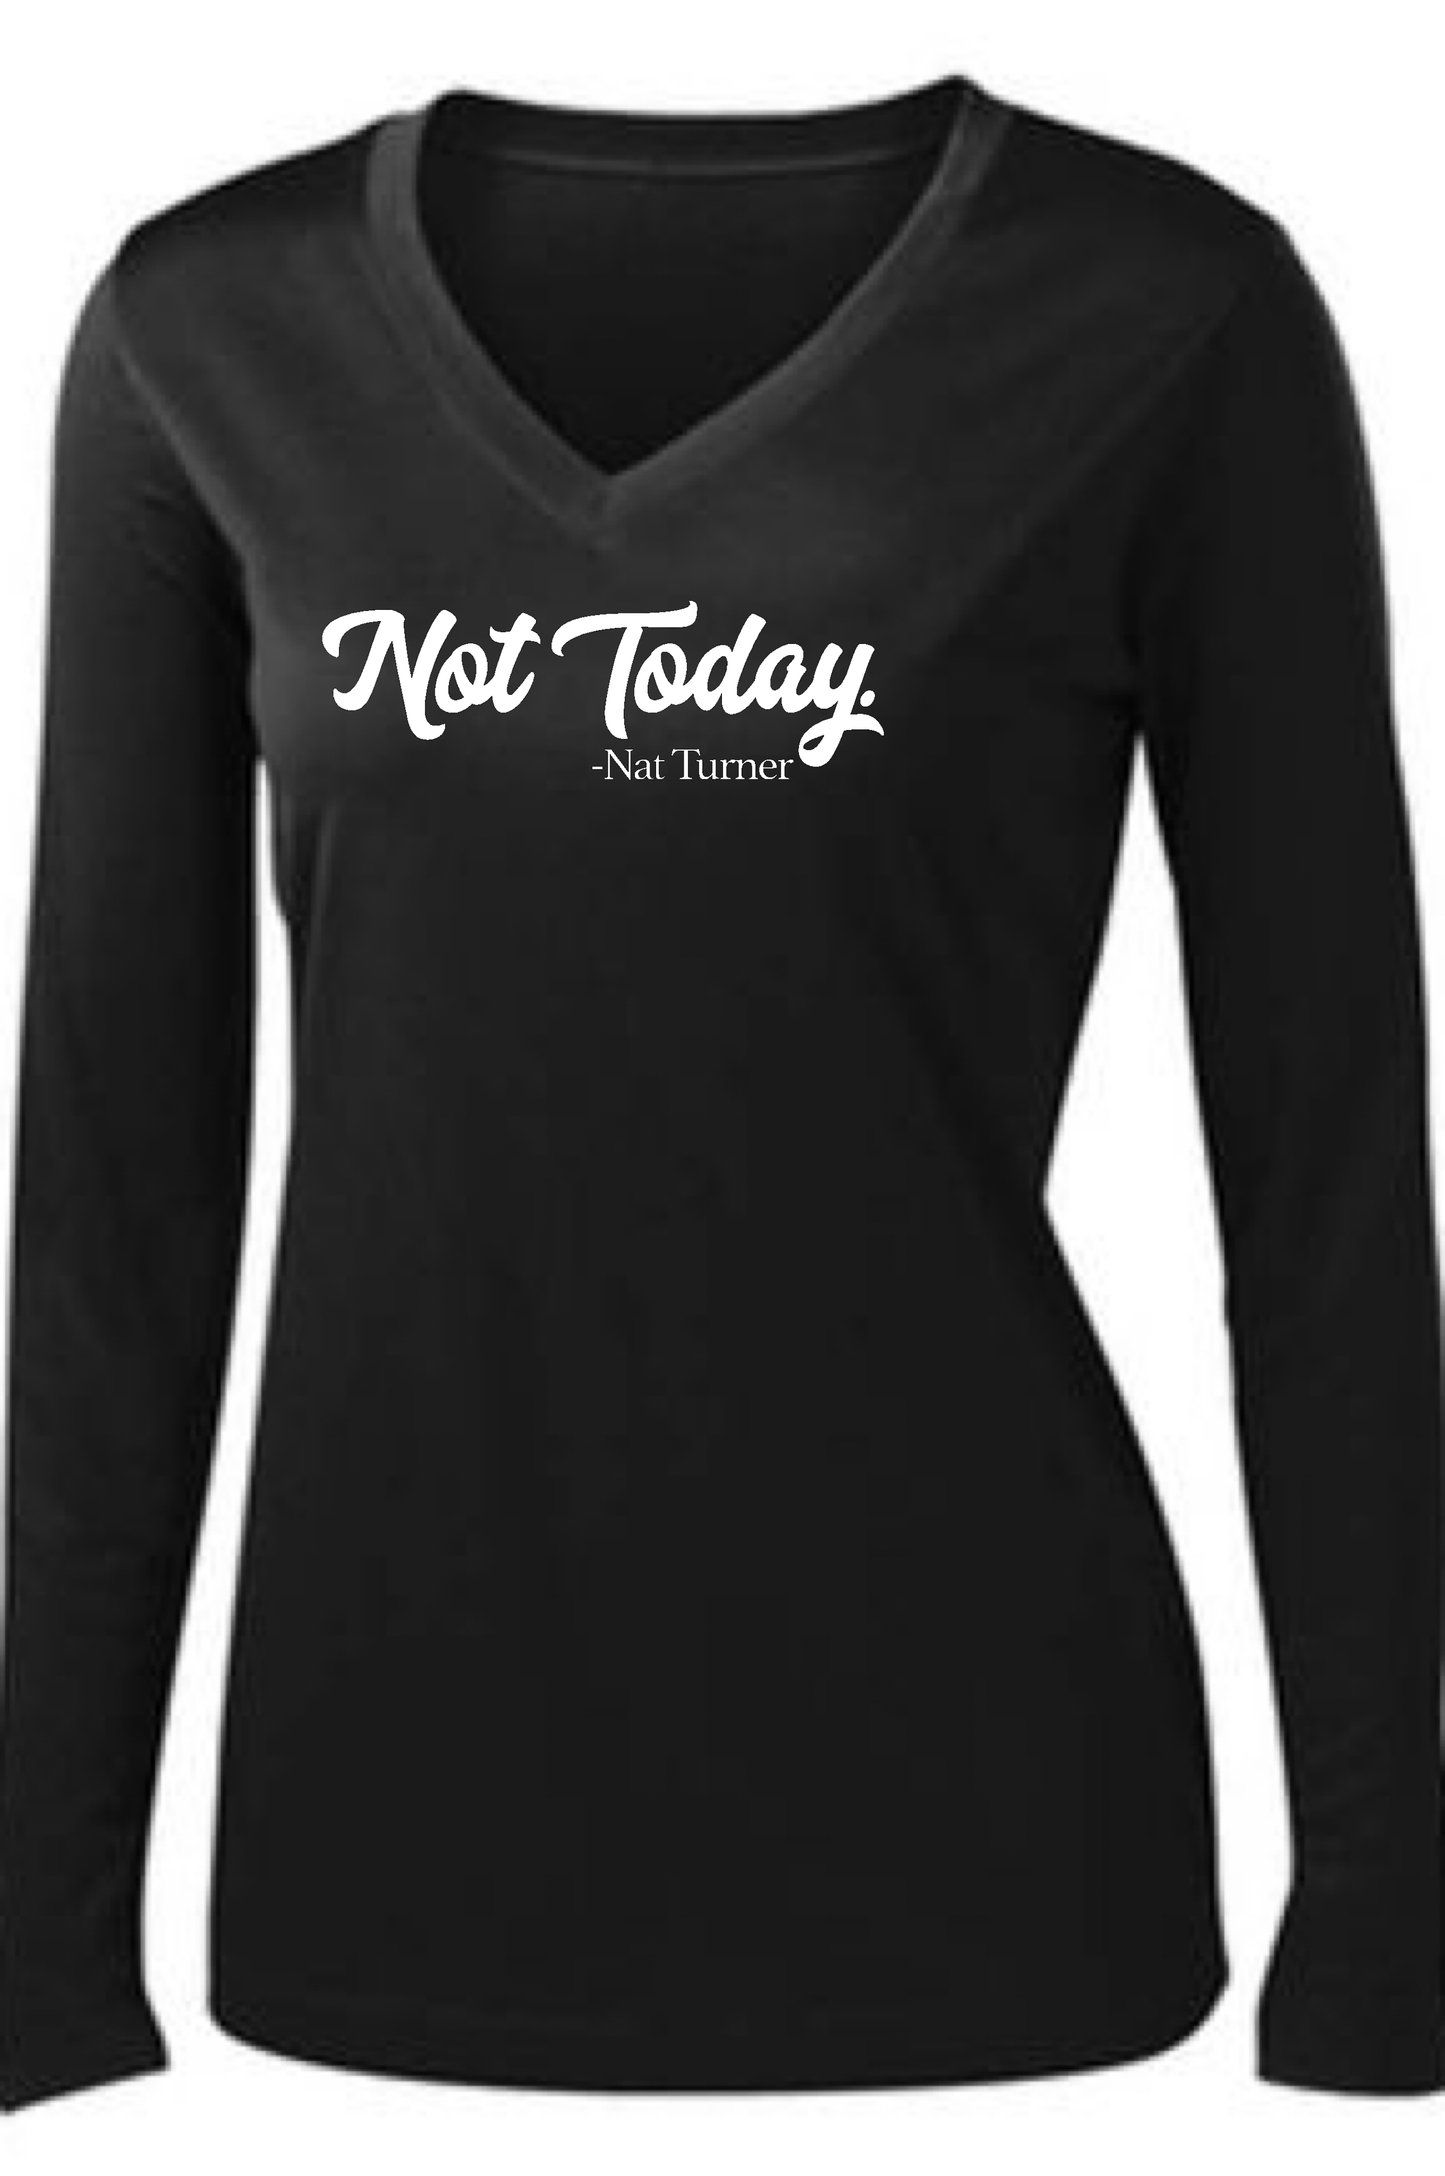 Not Today. Long Sleeve T-shirt for Black History MOnth